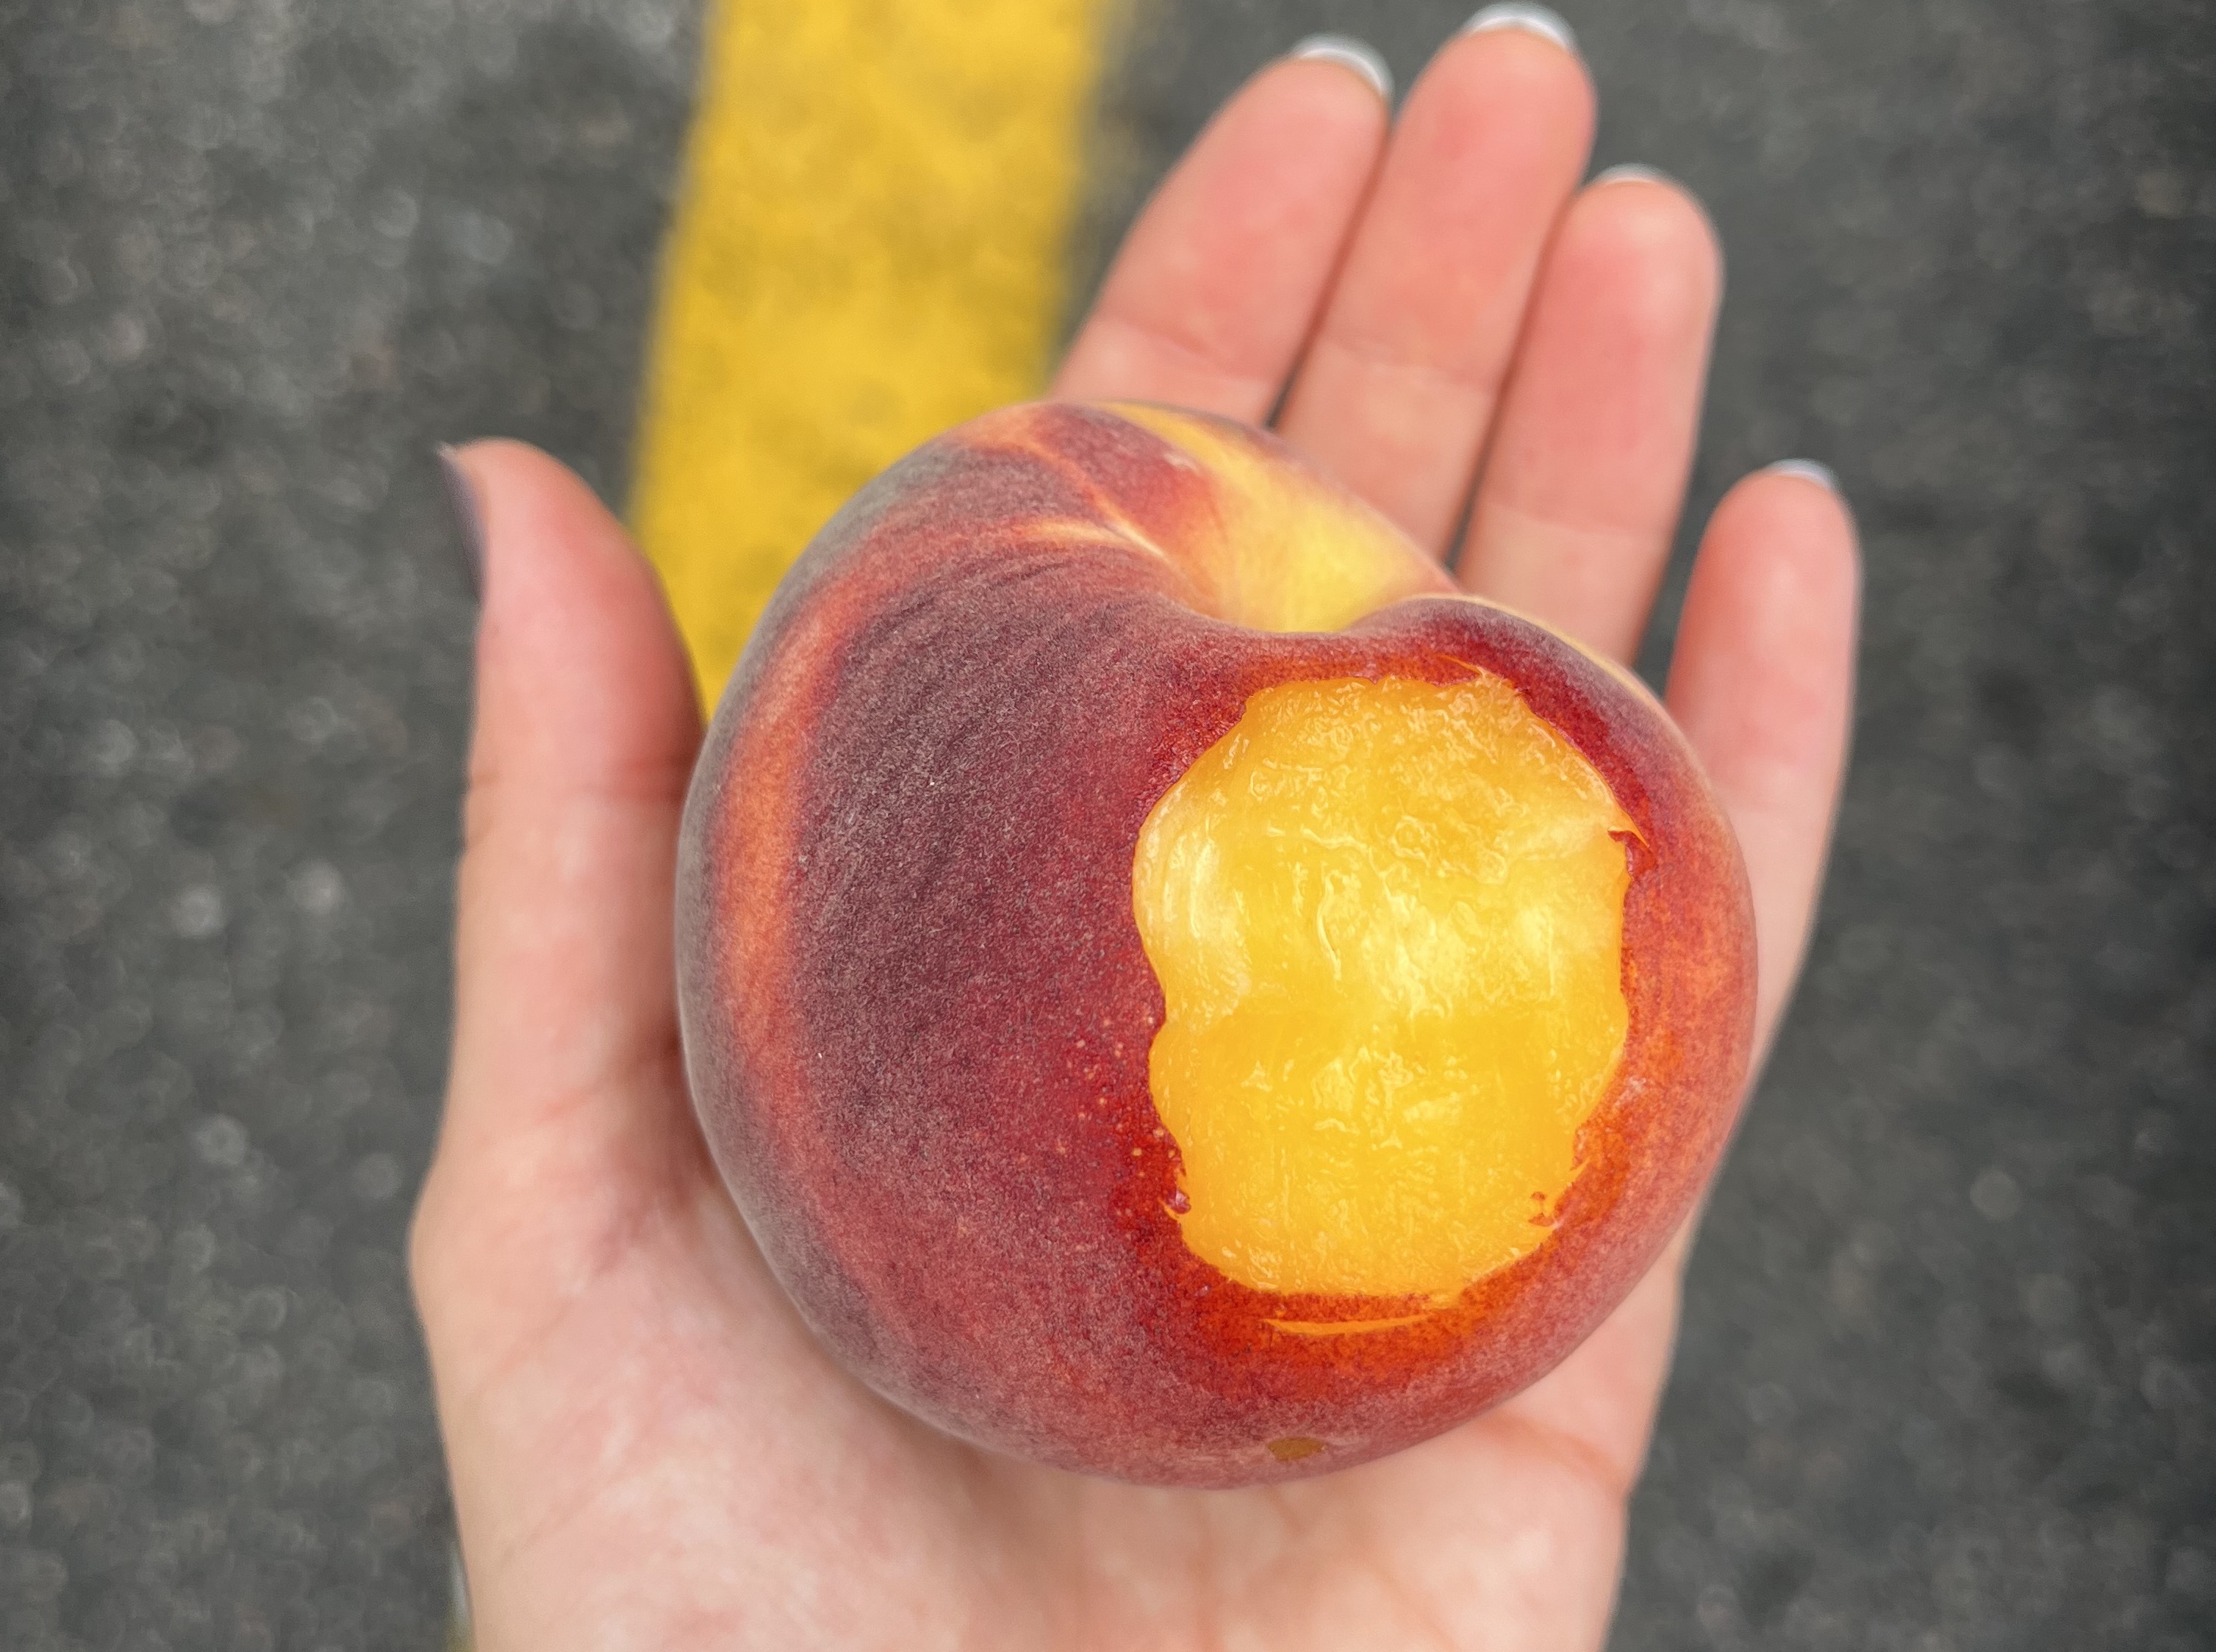 A hand holds a yellow peach with a bite taken out of it above an asphalt rode with a yellow dividing line. 